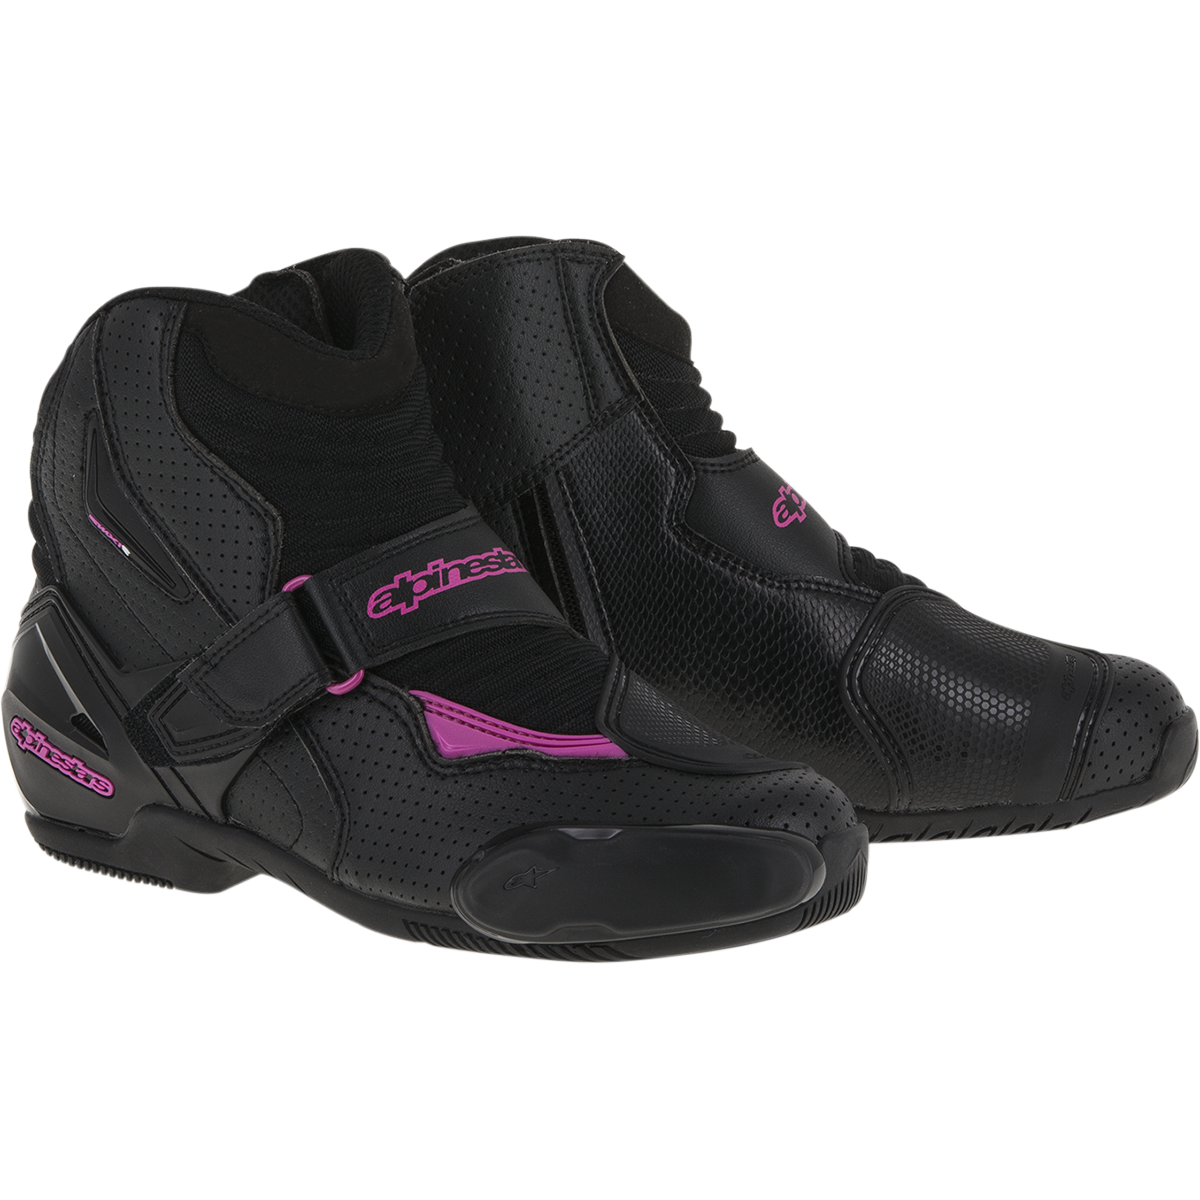 Stella Smx-1 R Vented Boots